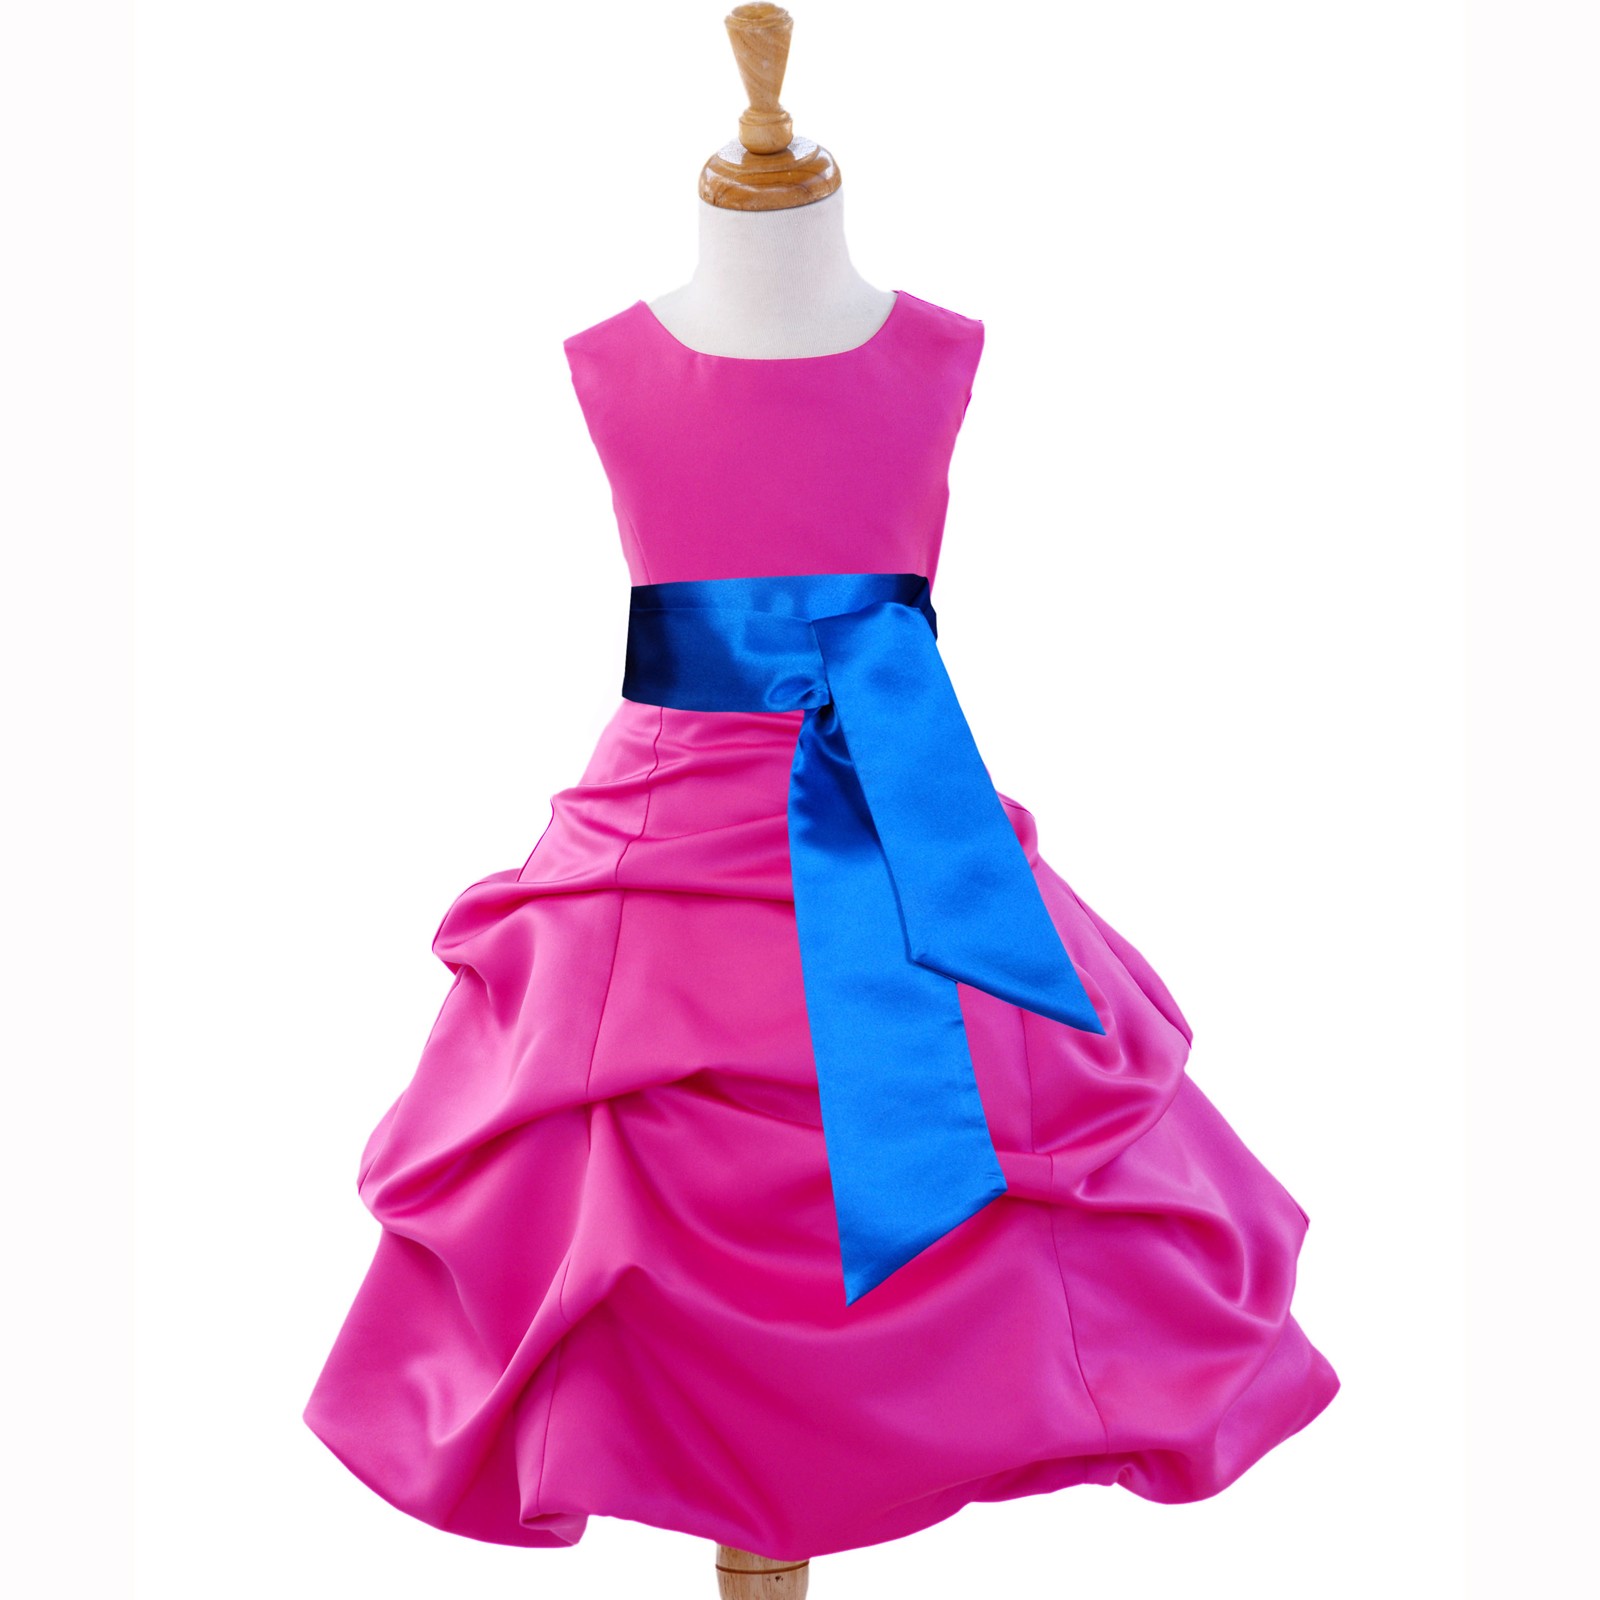 Blue and pink fuchsia dress, Girls 2-14 years old